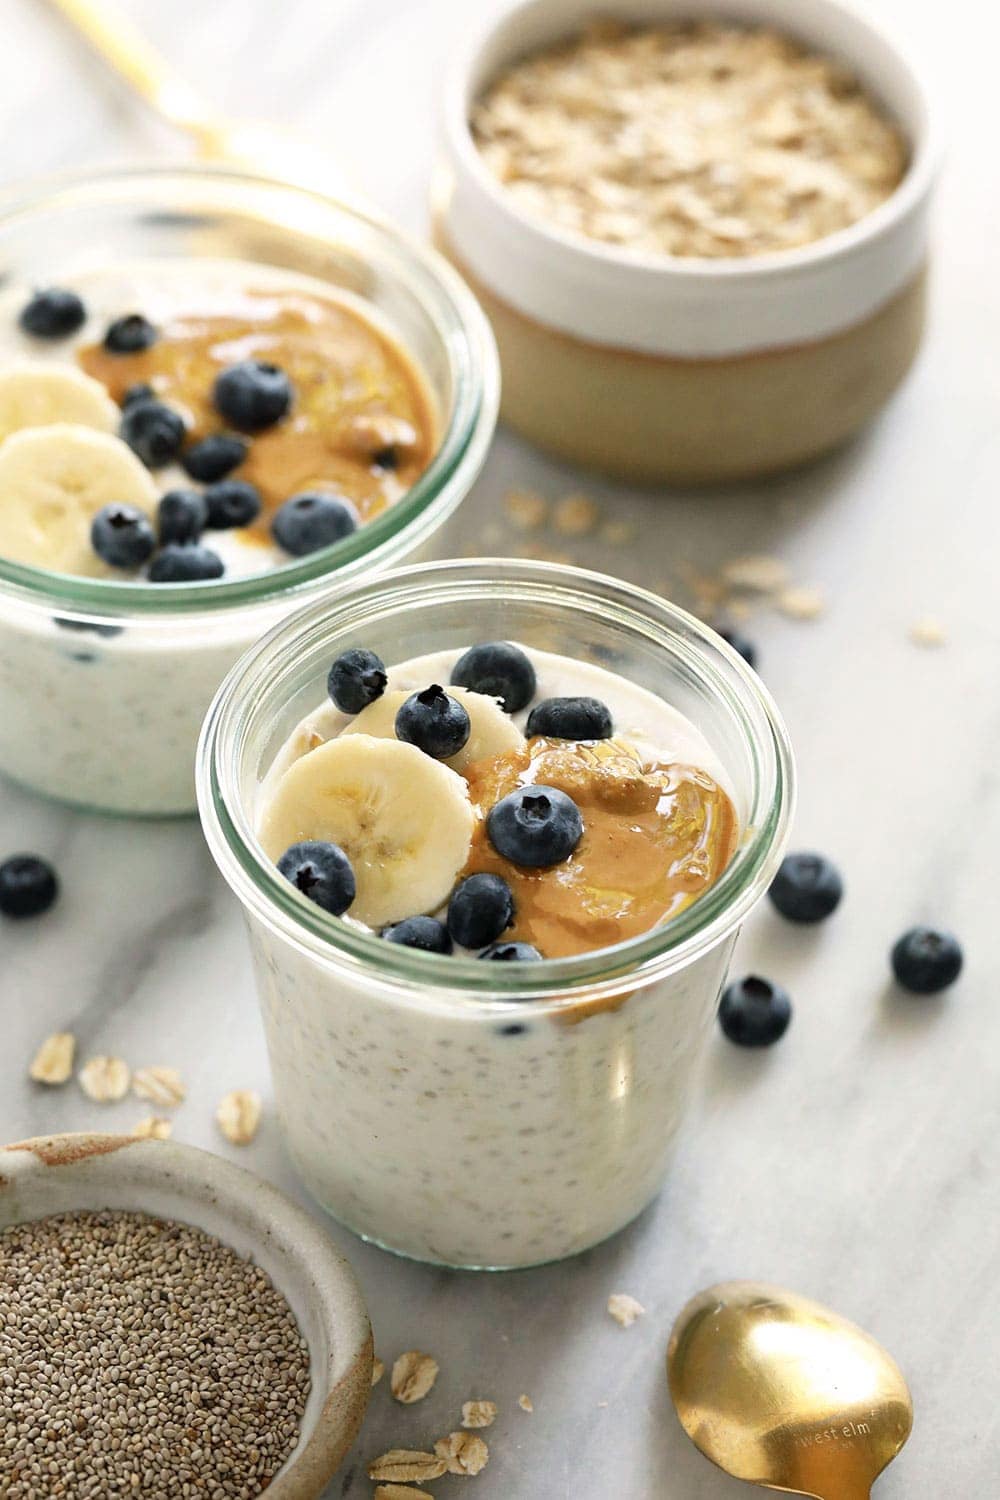 How to Make Overnight Oats (+ 8 flavors!) - Fit Foodie Finds